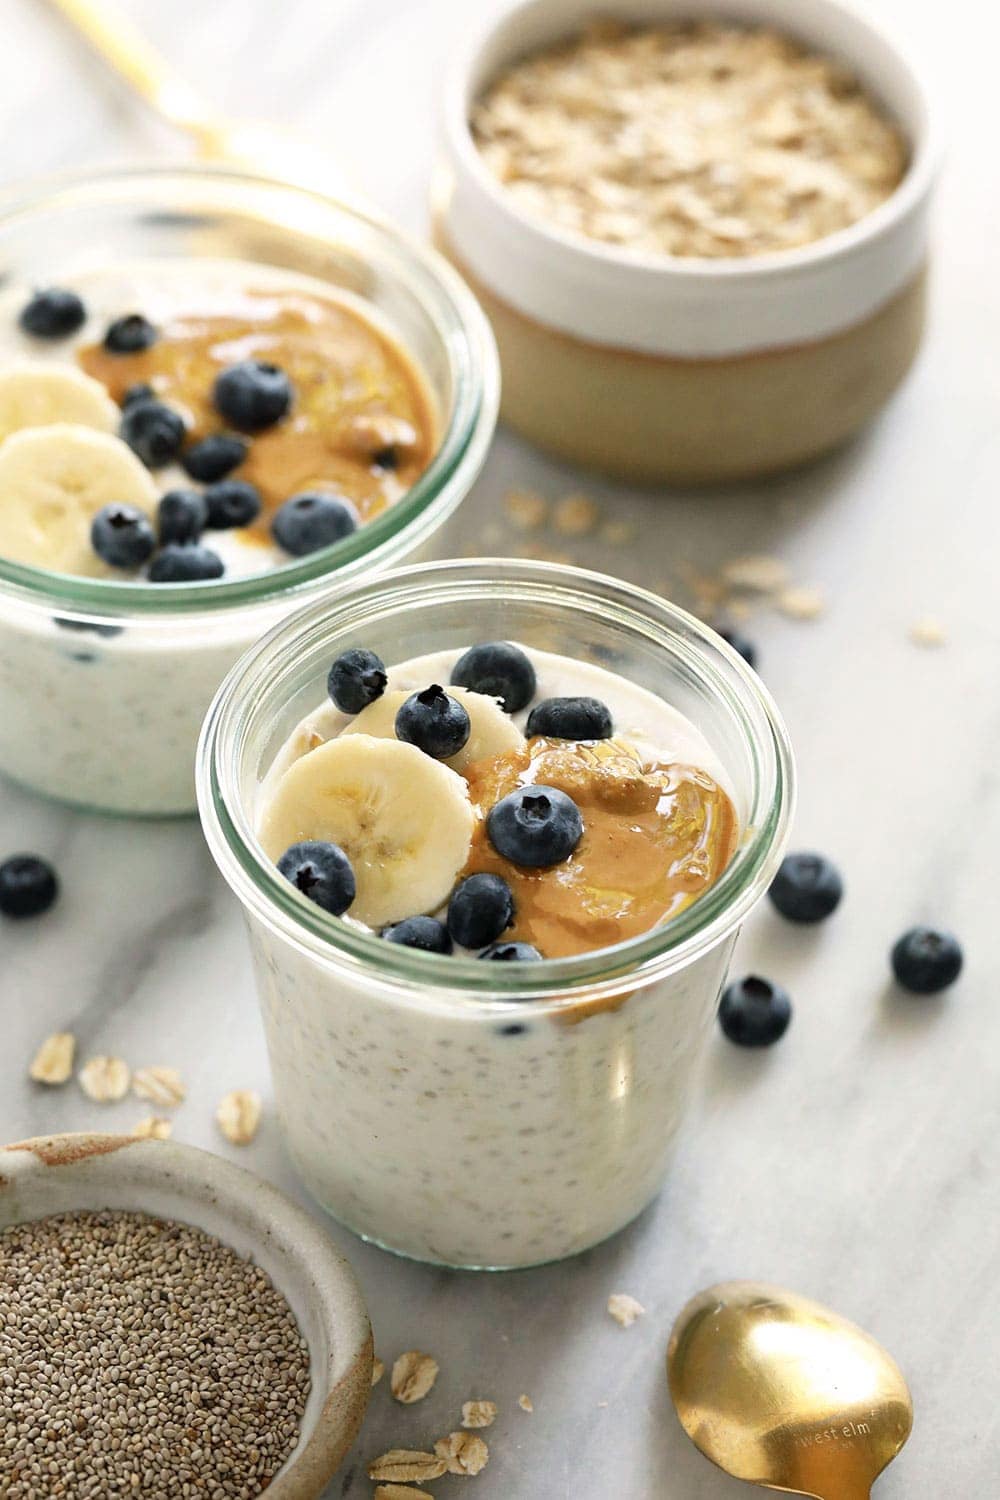 How to Make Overnight Oats (+ 8 flavors!) - Fit Foodie Finds